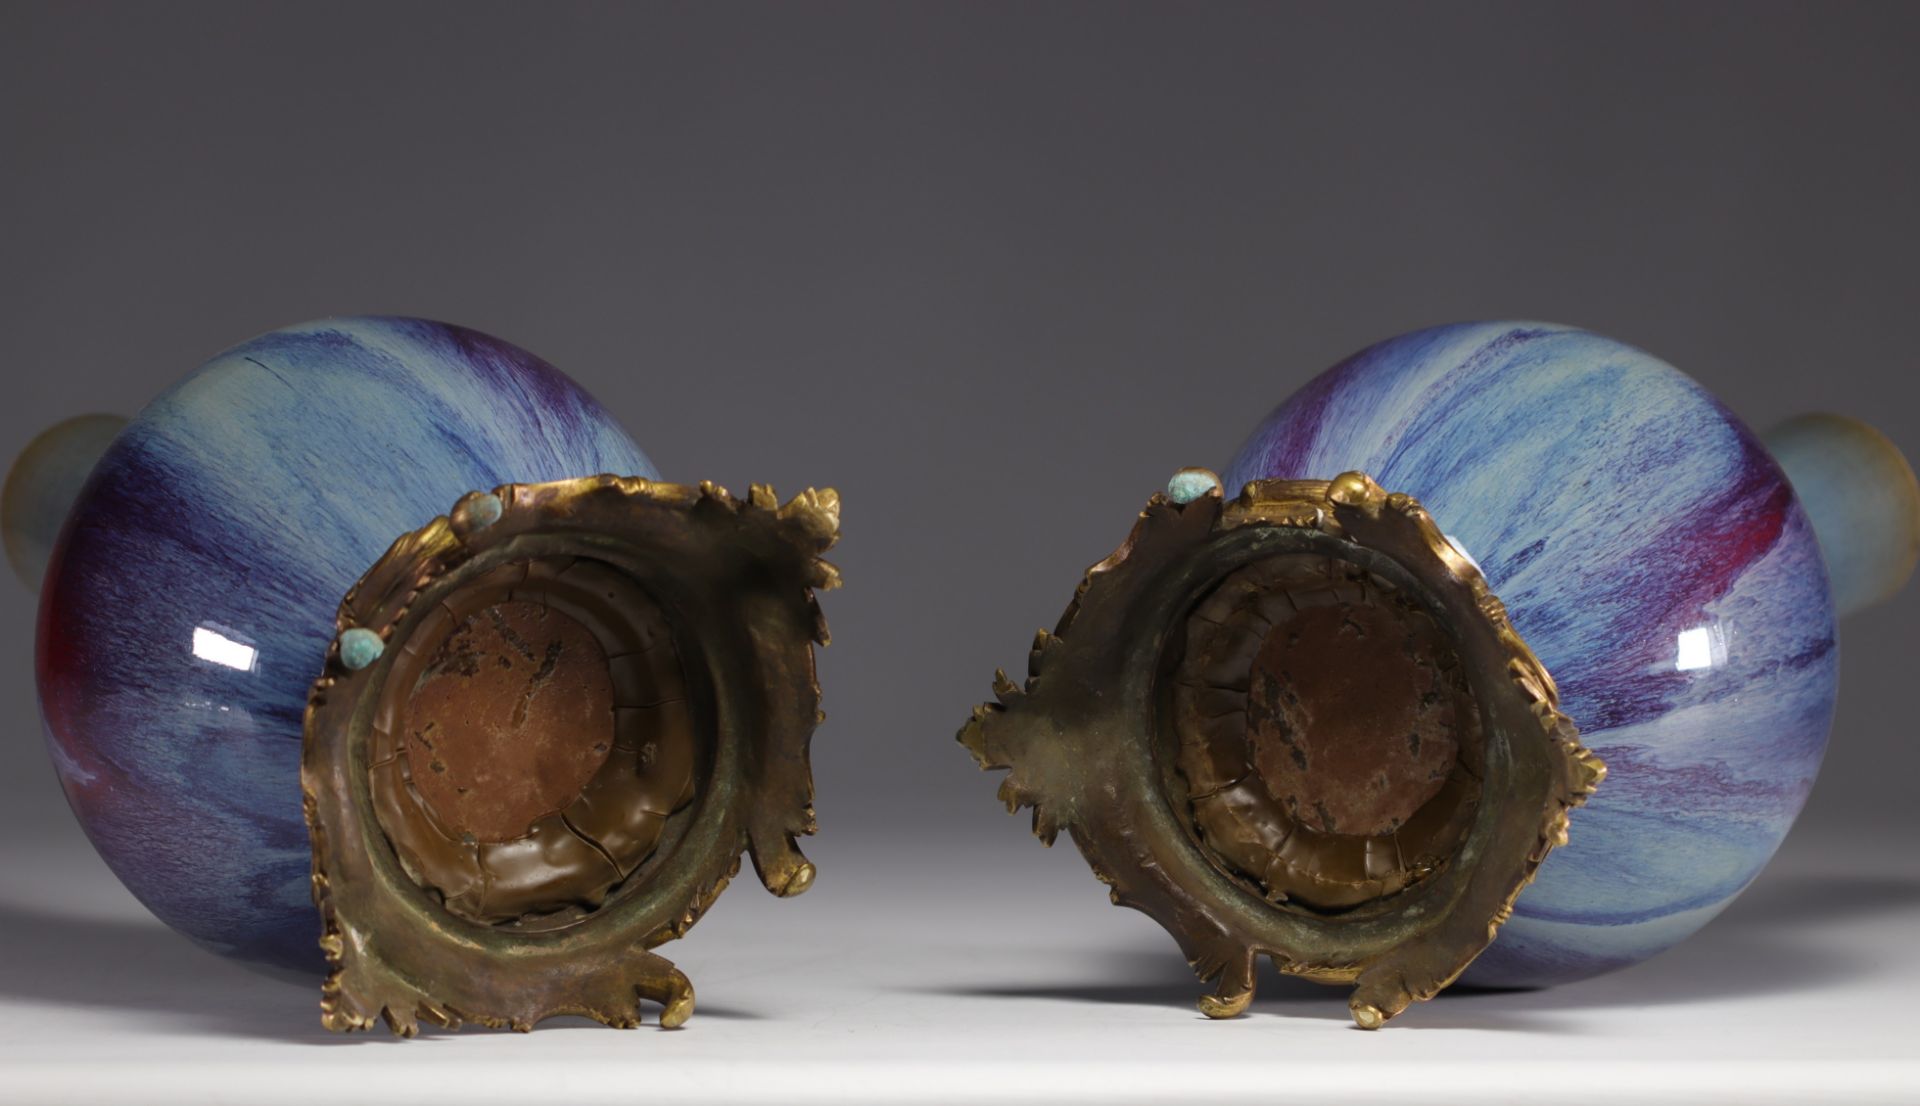 Rare pair of porcelain vases with flamed glaze mounted on bronze from 18th century - Image 5 of 5